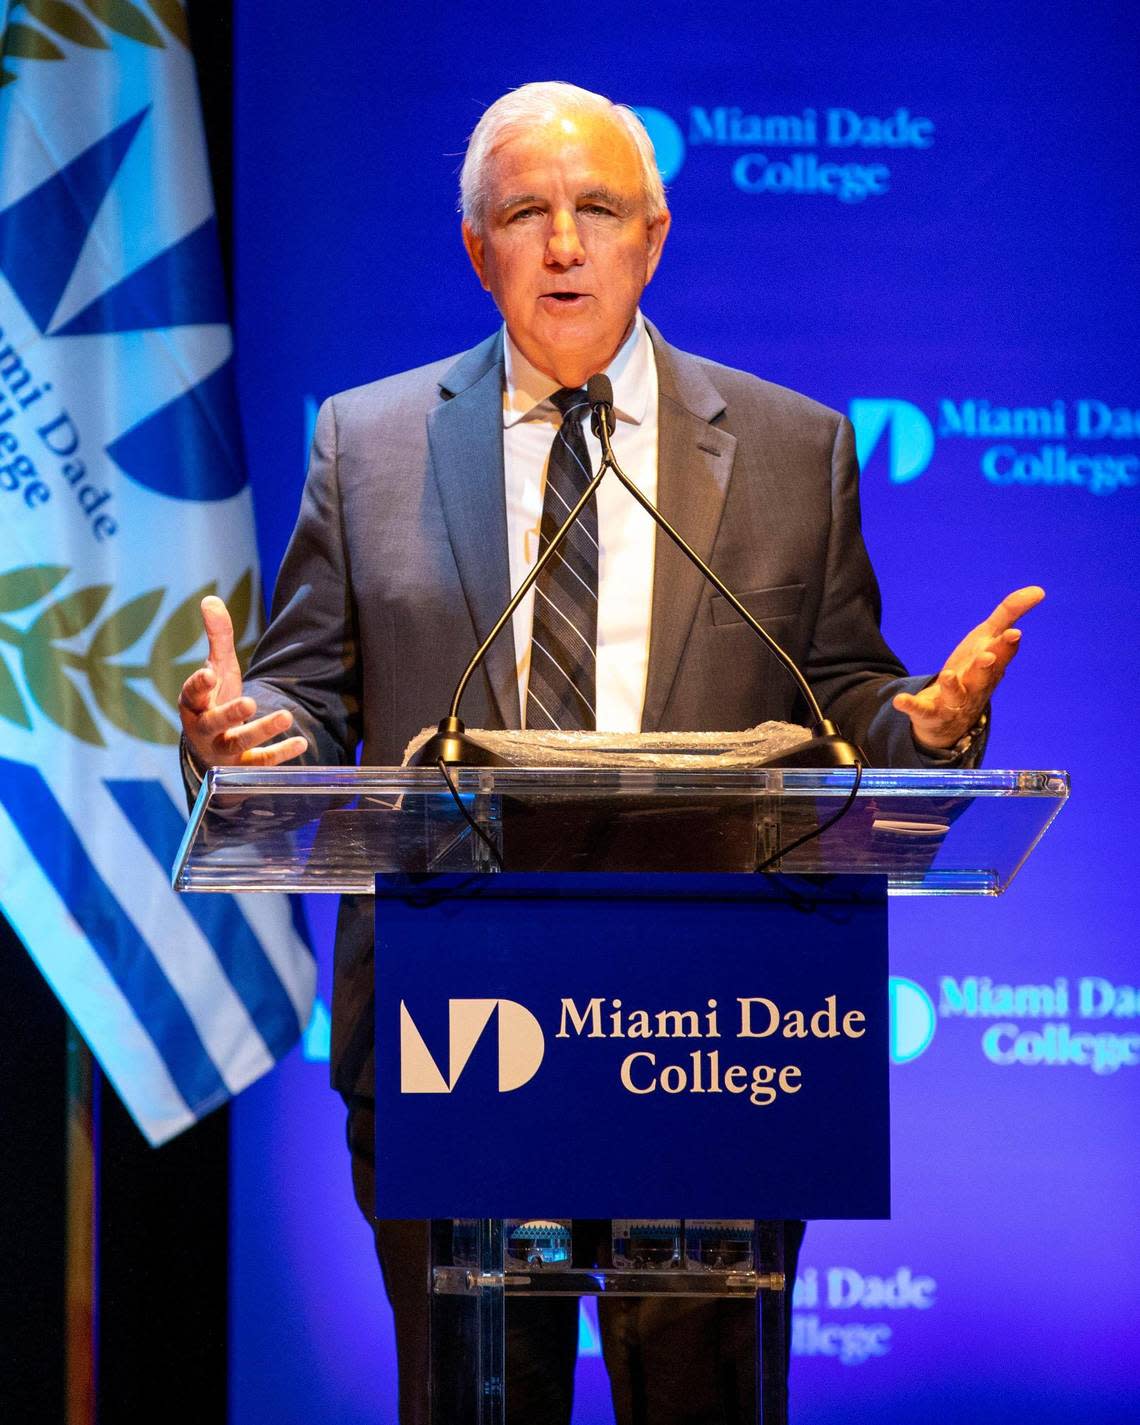 Carlos Gimenez, U.S. representative for Florida’s 28th Congressional District, was mayor of Miami-Dade between 2011 and 2020.